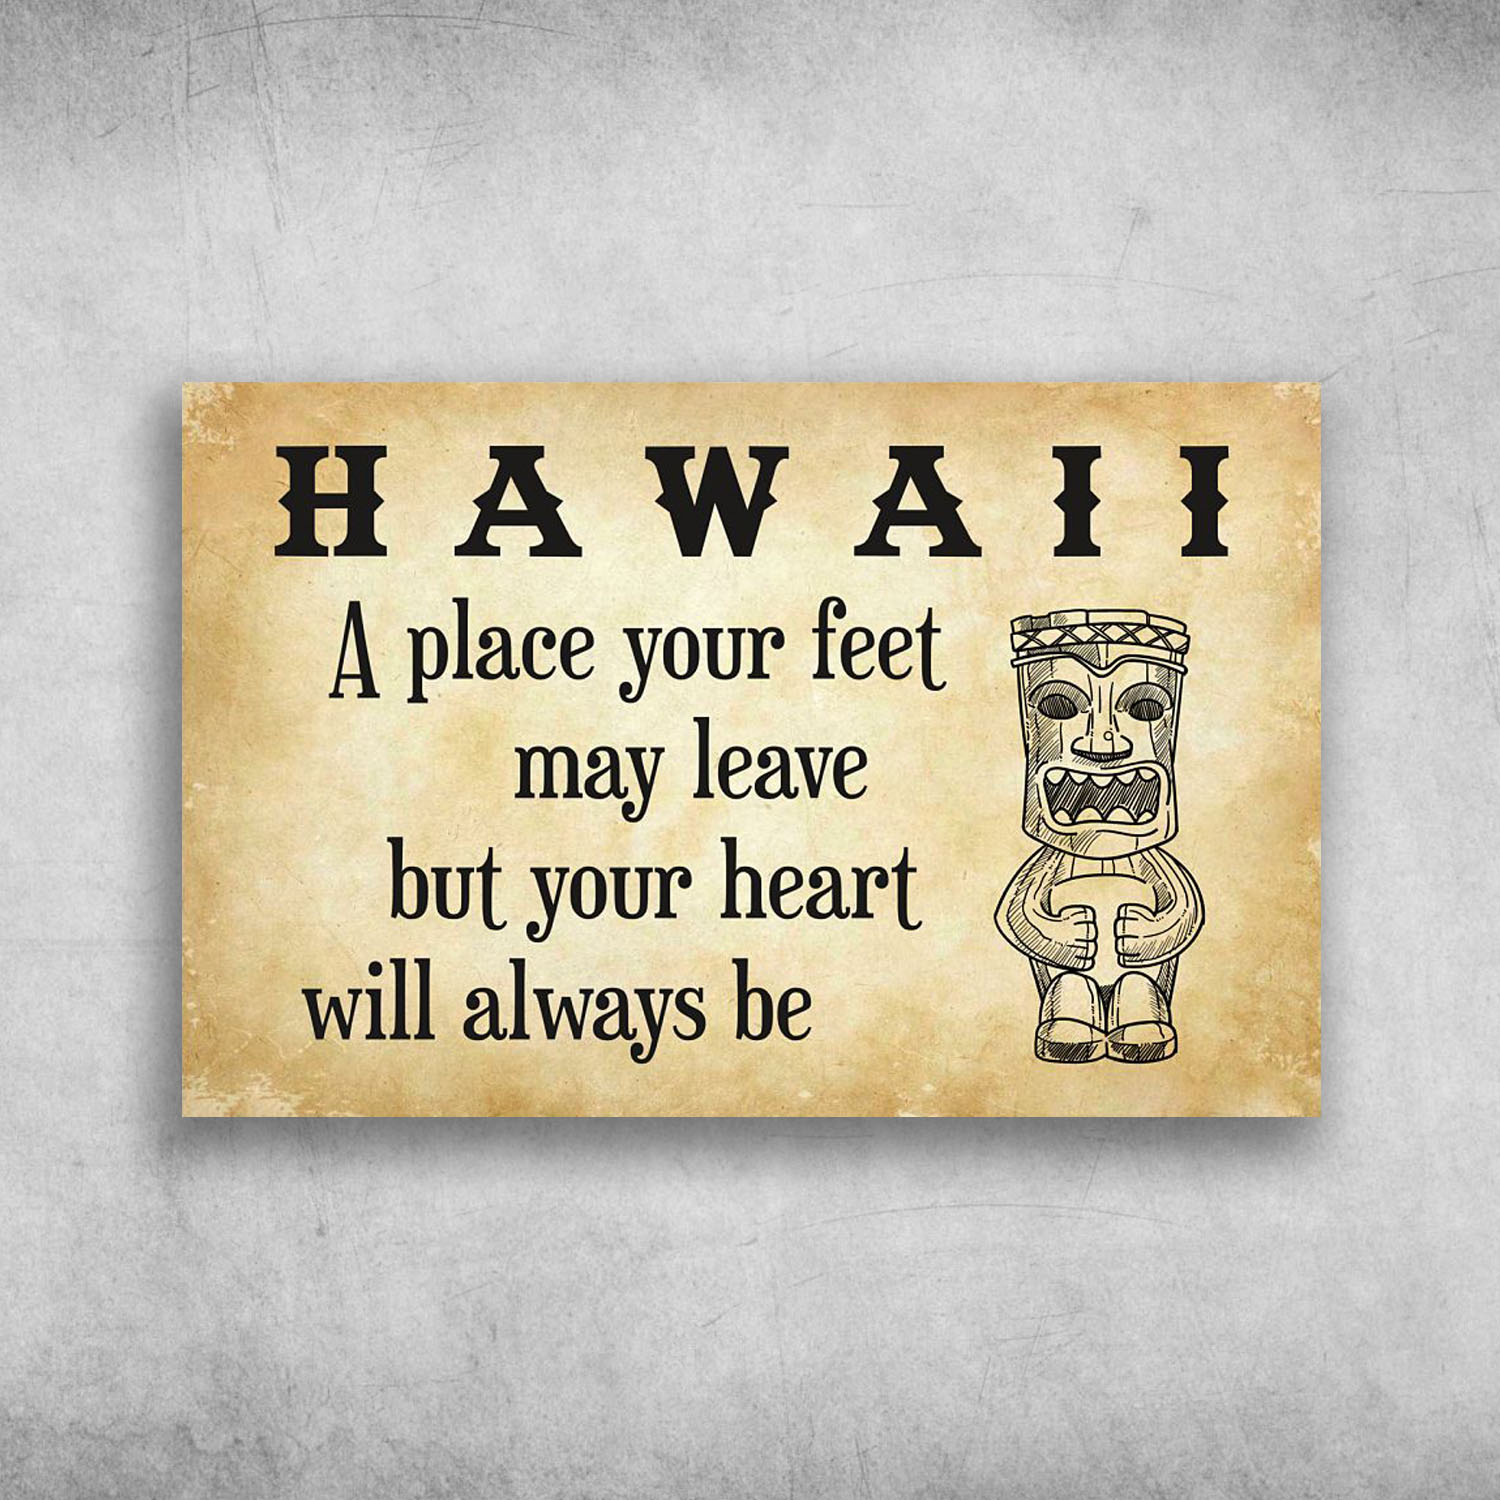 Hawaii a place your feet may leave